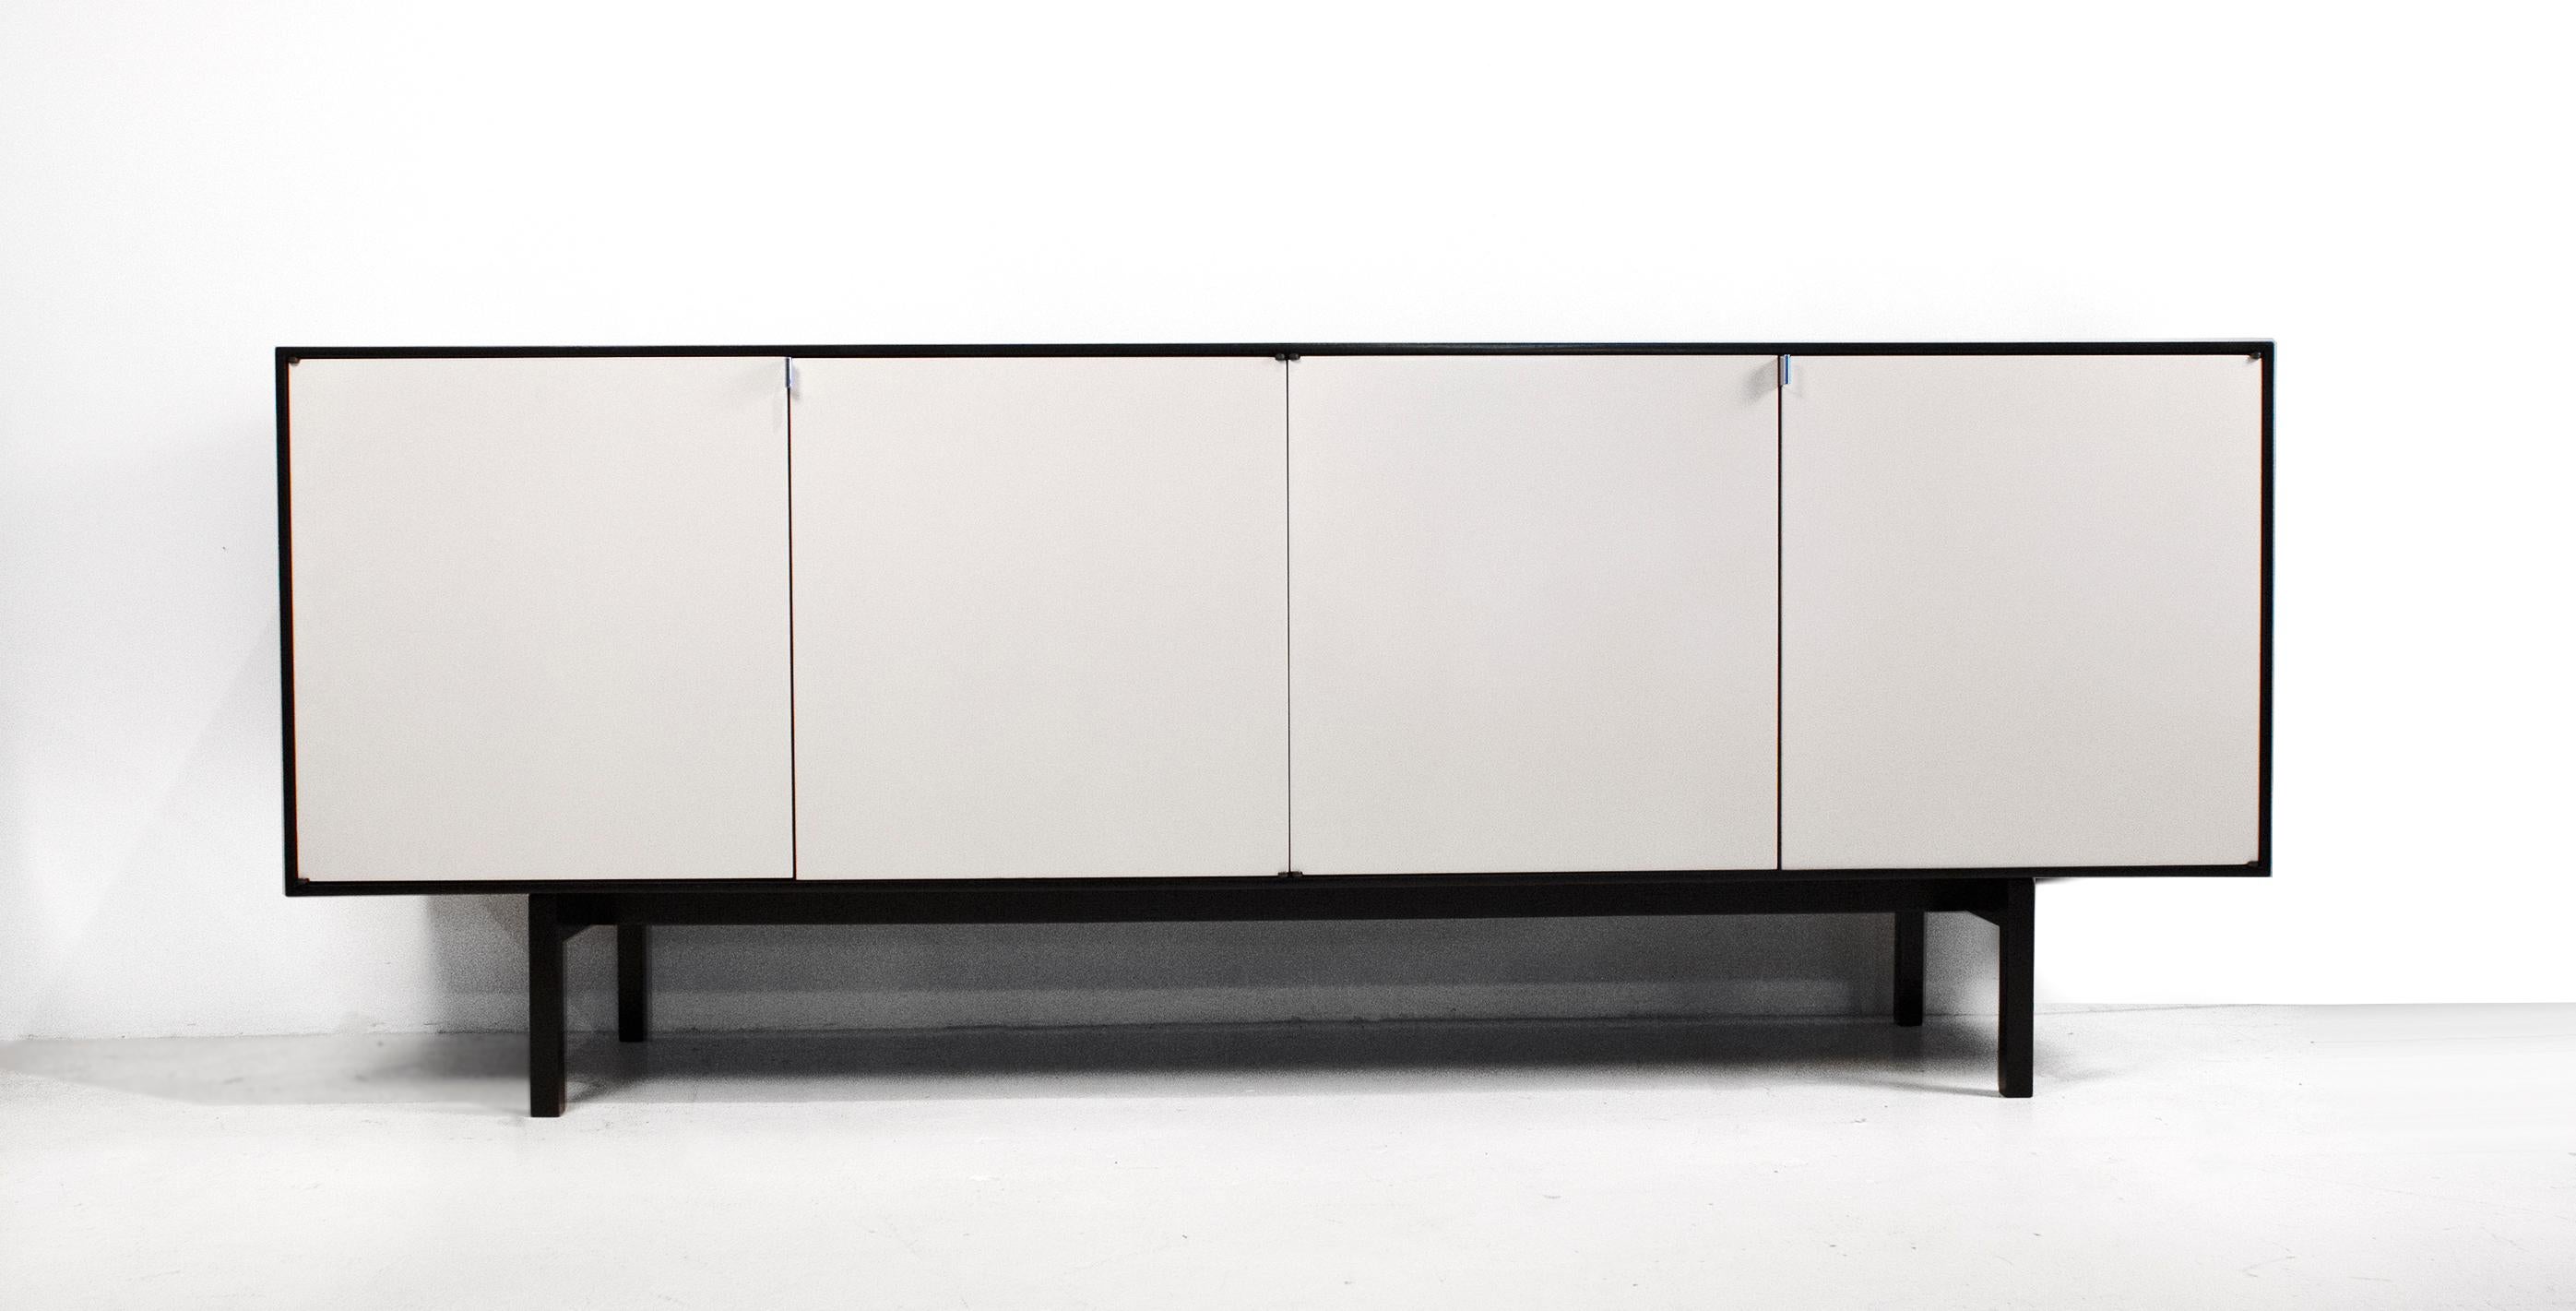 Early Florence Knoll model 541 credenza with black case, antique white doors and maple interior. All original specs in exceptional condition. This is considered by many collectors to be the best credenza that Florence ever designed. It is very